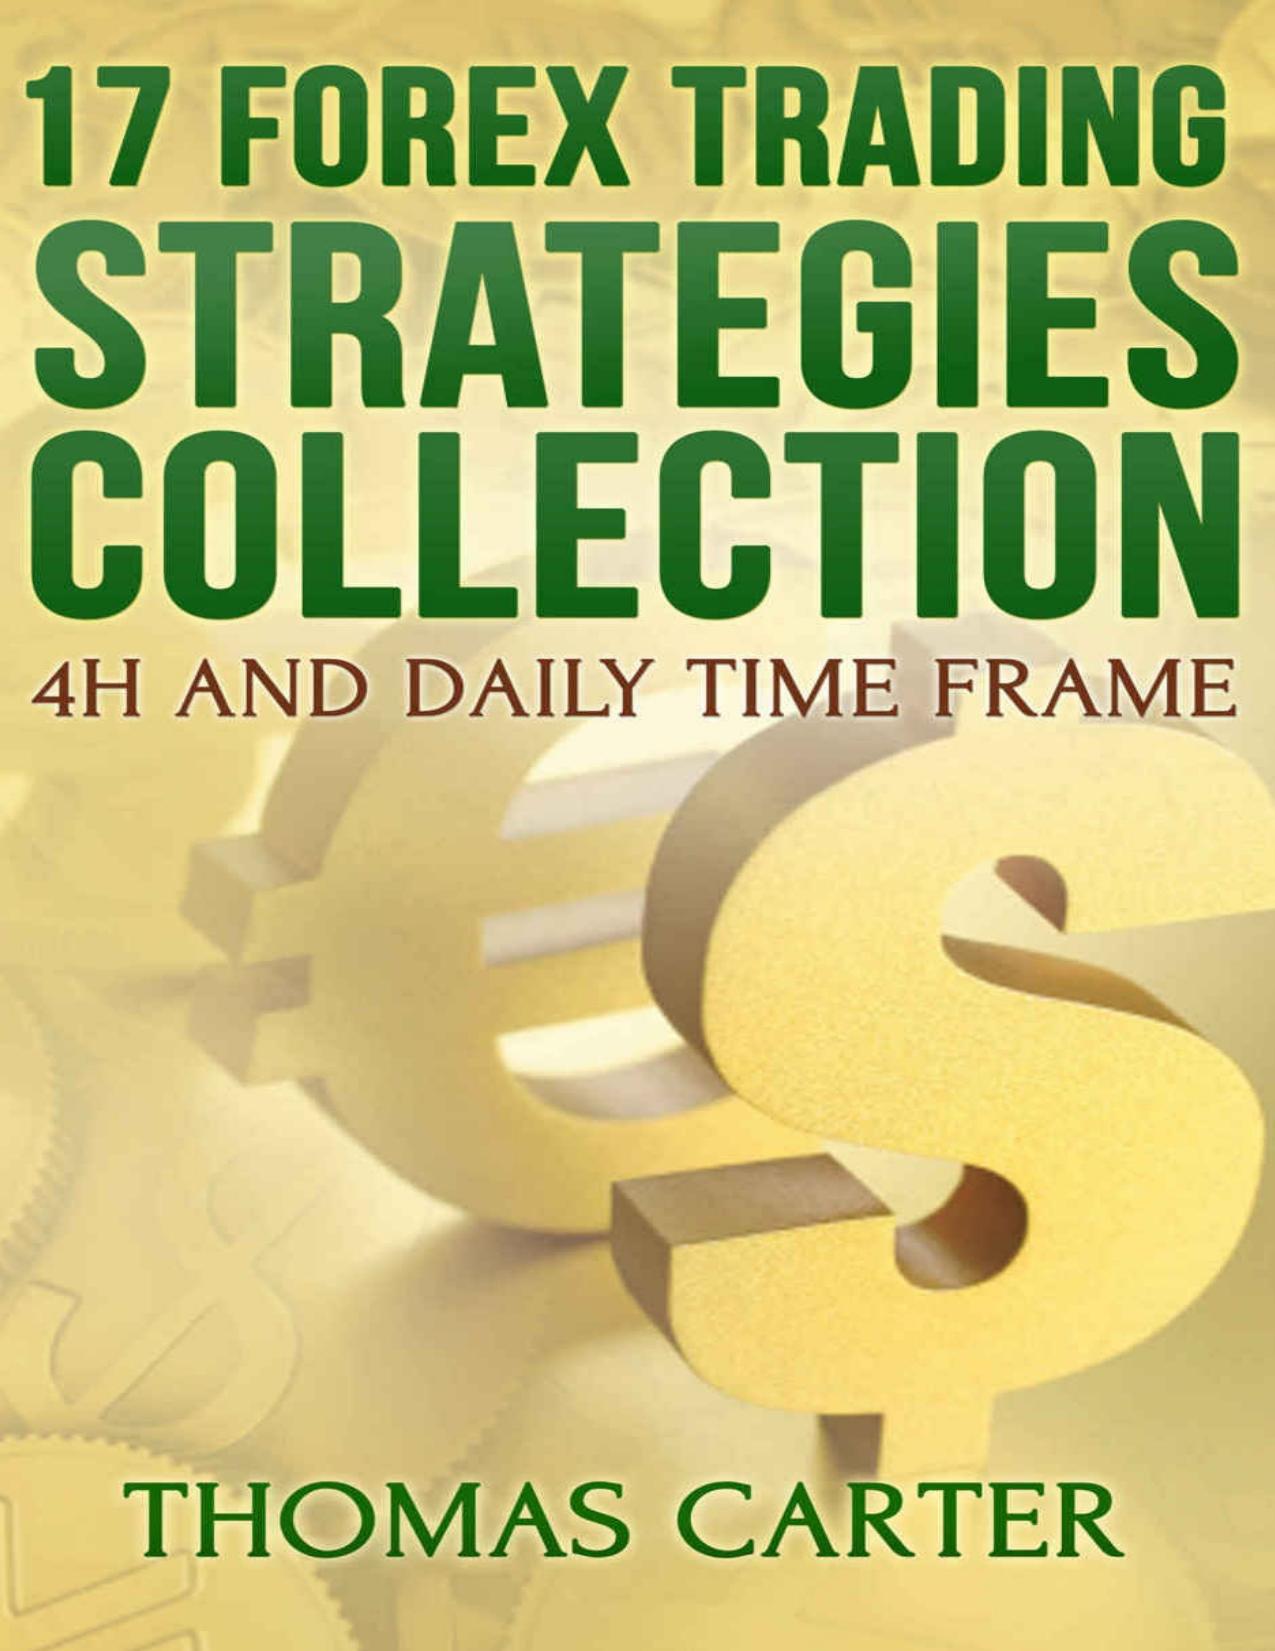 17 Forex Trading Strategies Collection (4H and Daily Time Frame) by Thomas Carter